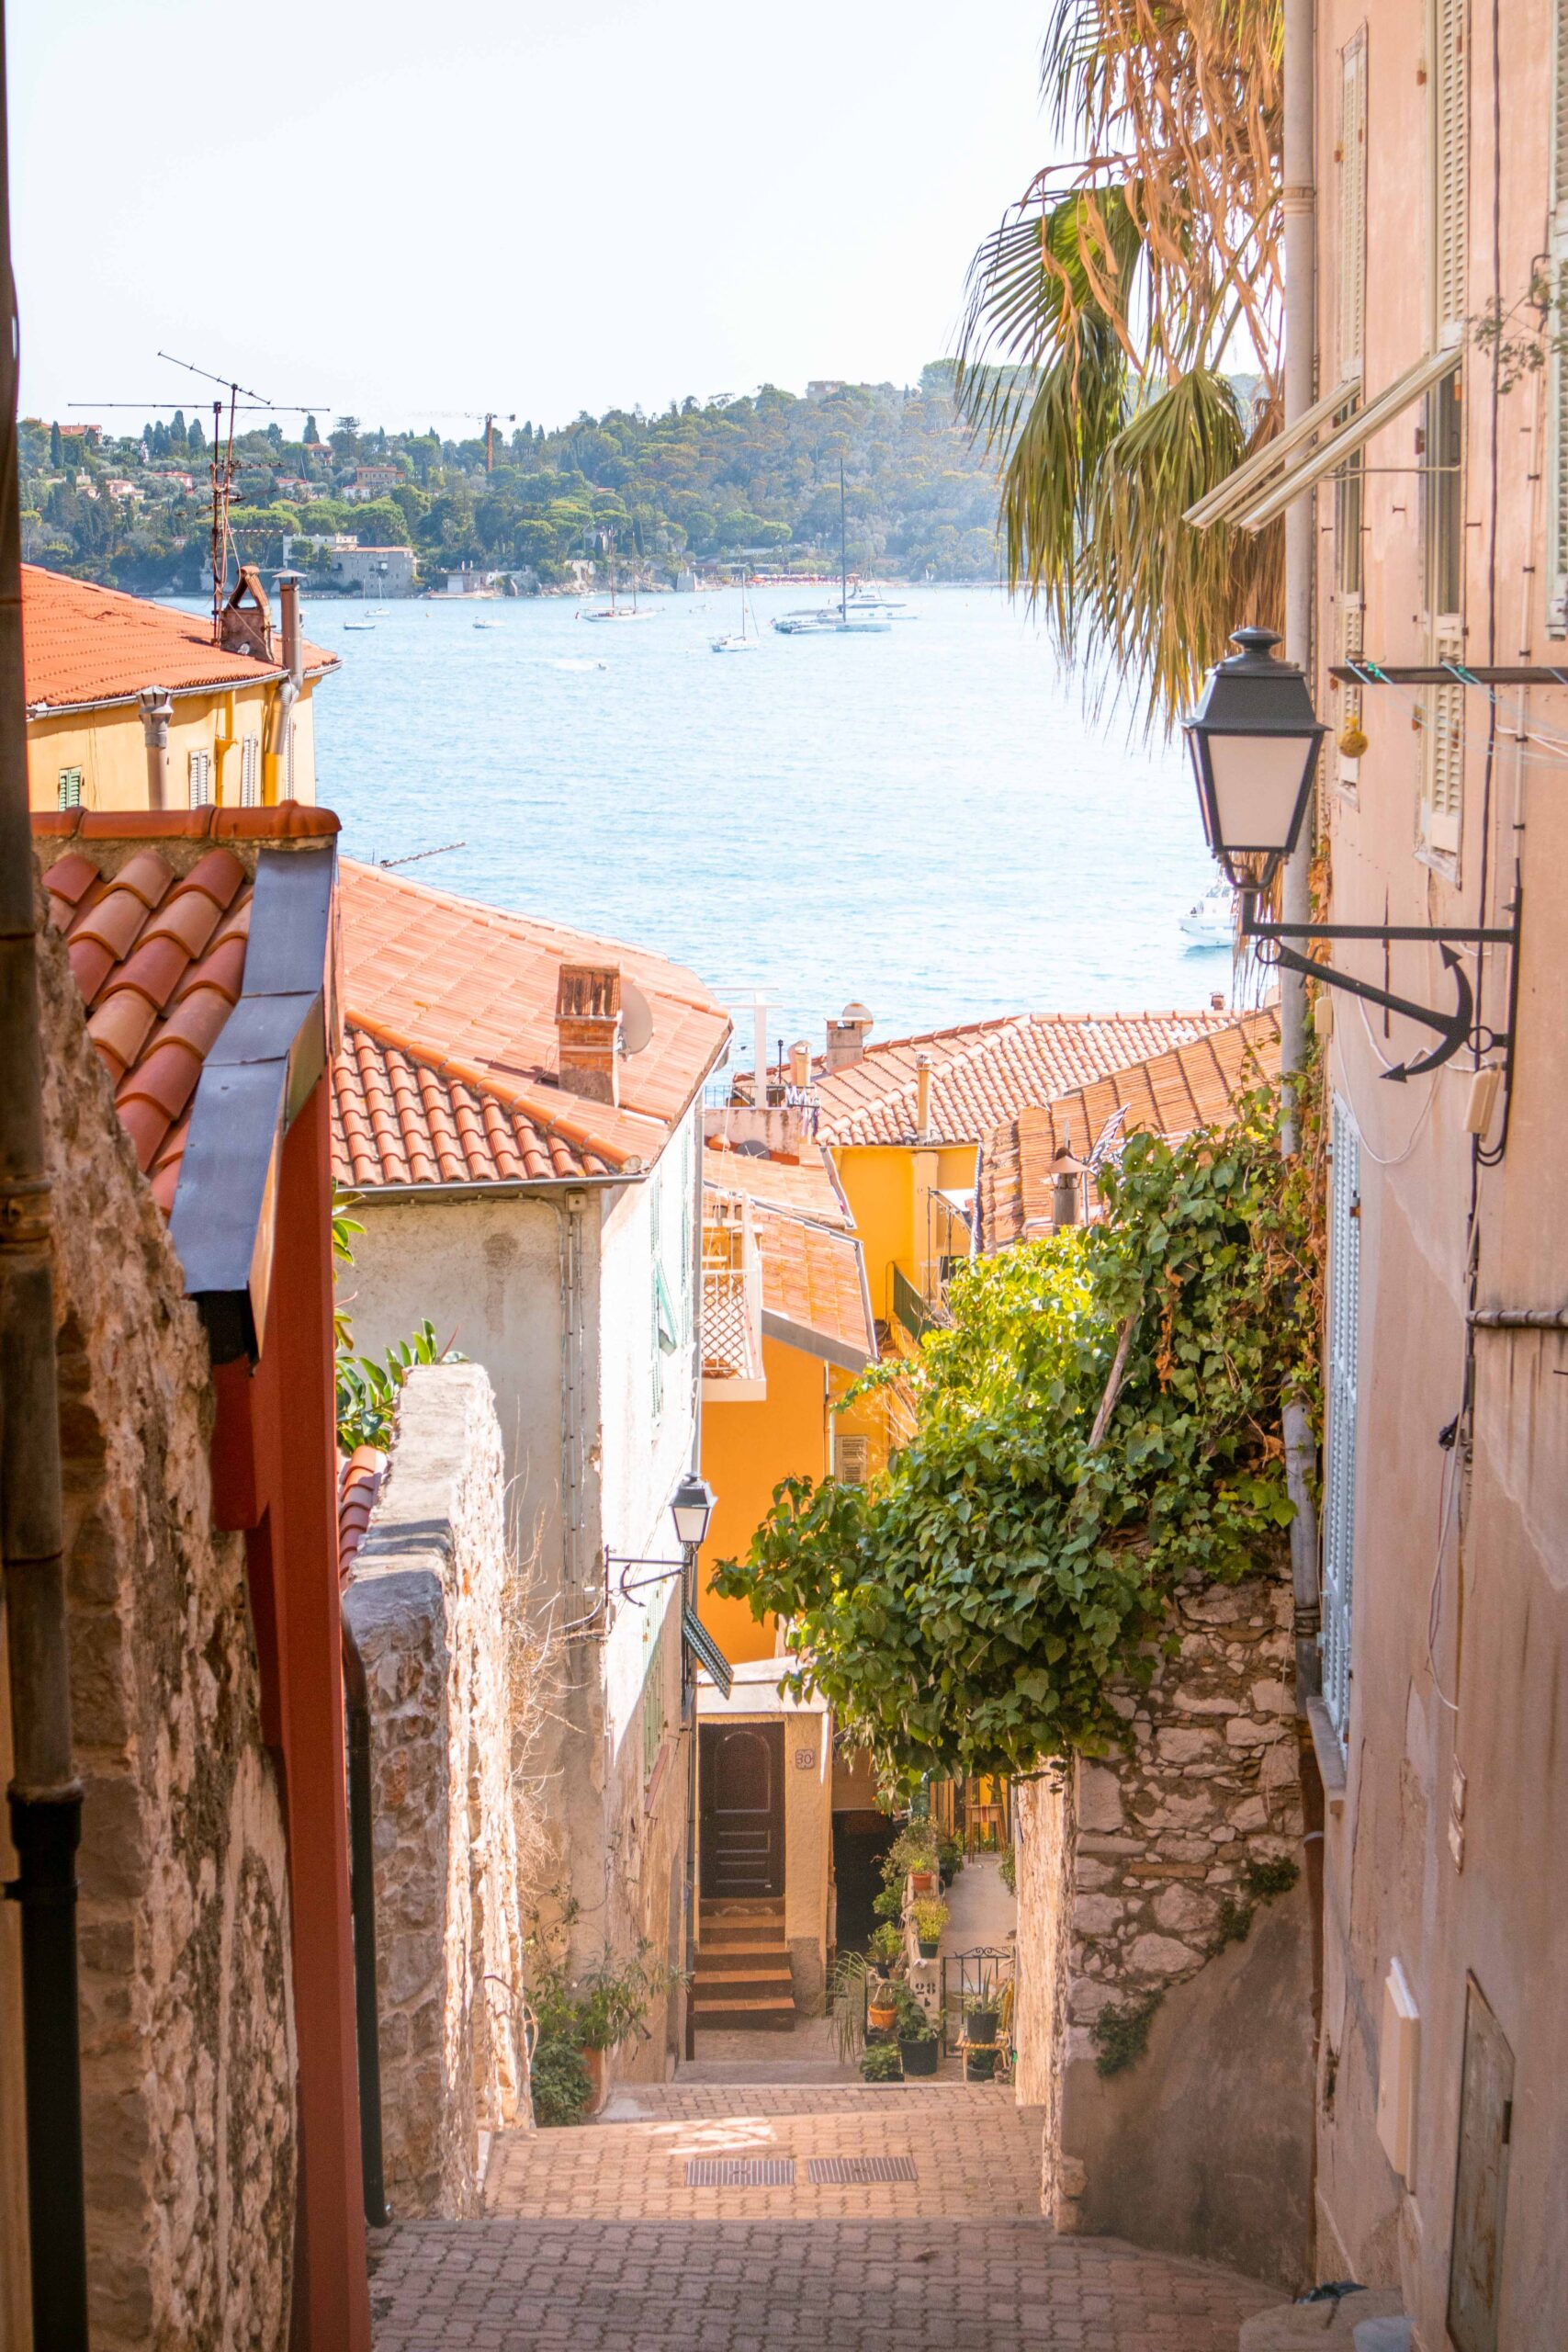 Colourful and empty street with a view over the Mediterranean sea and the Saint-Jean-Cap Ferrat peninsula in the Old Town of Villefranche-sur-Mer, France